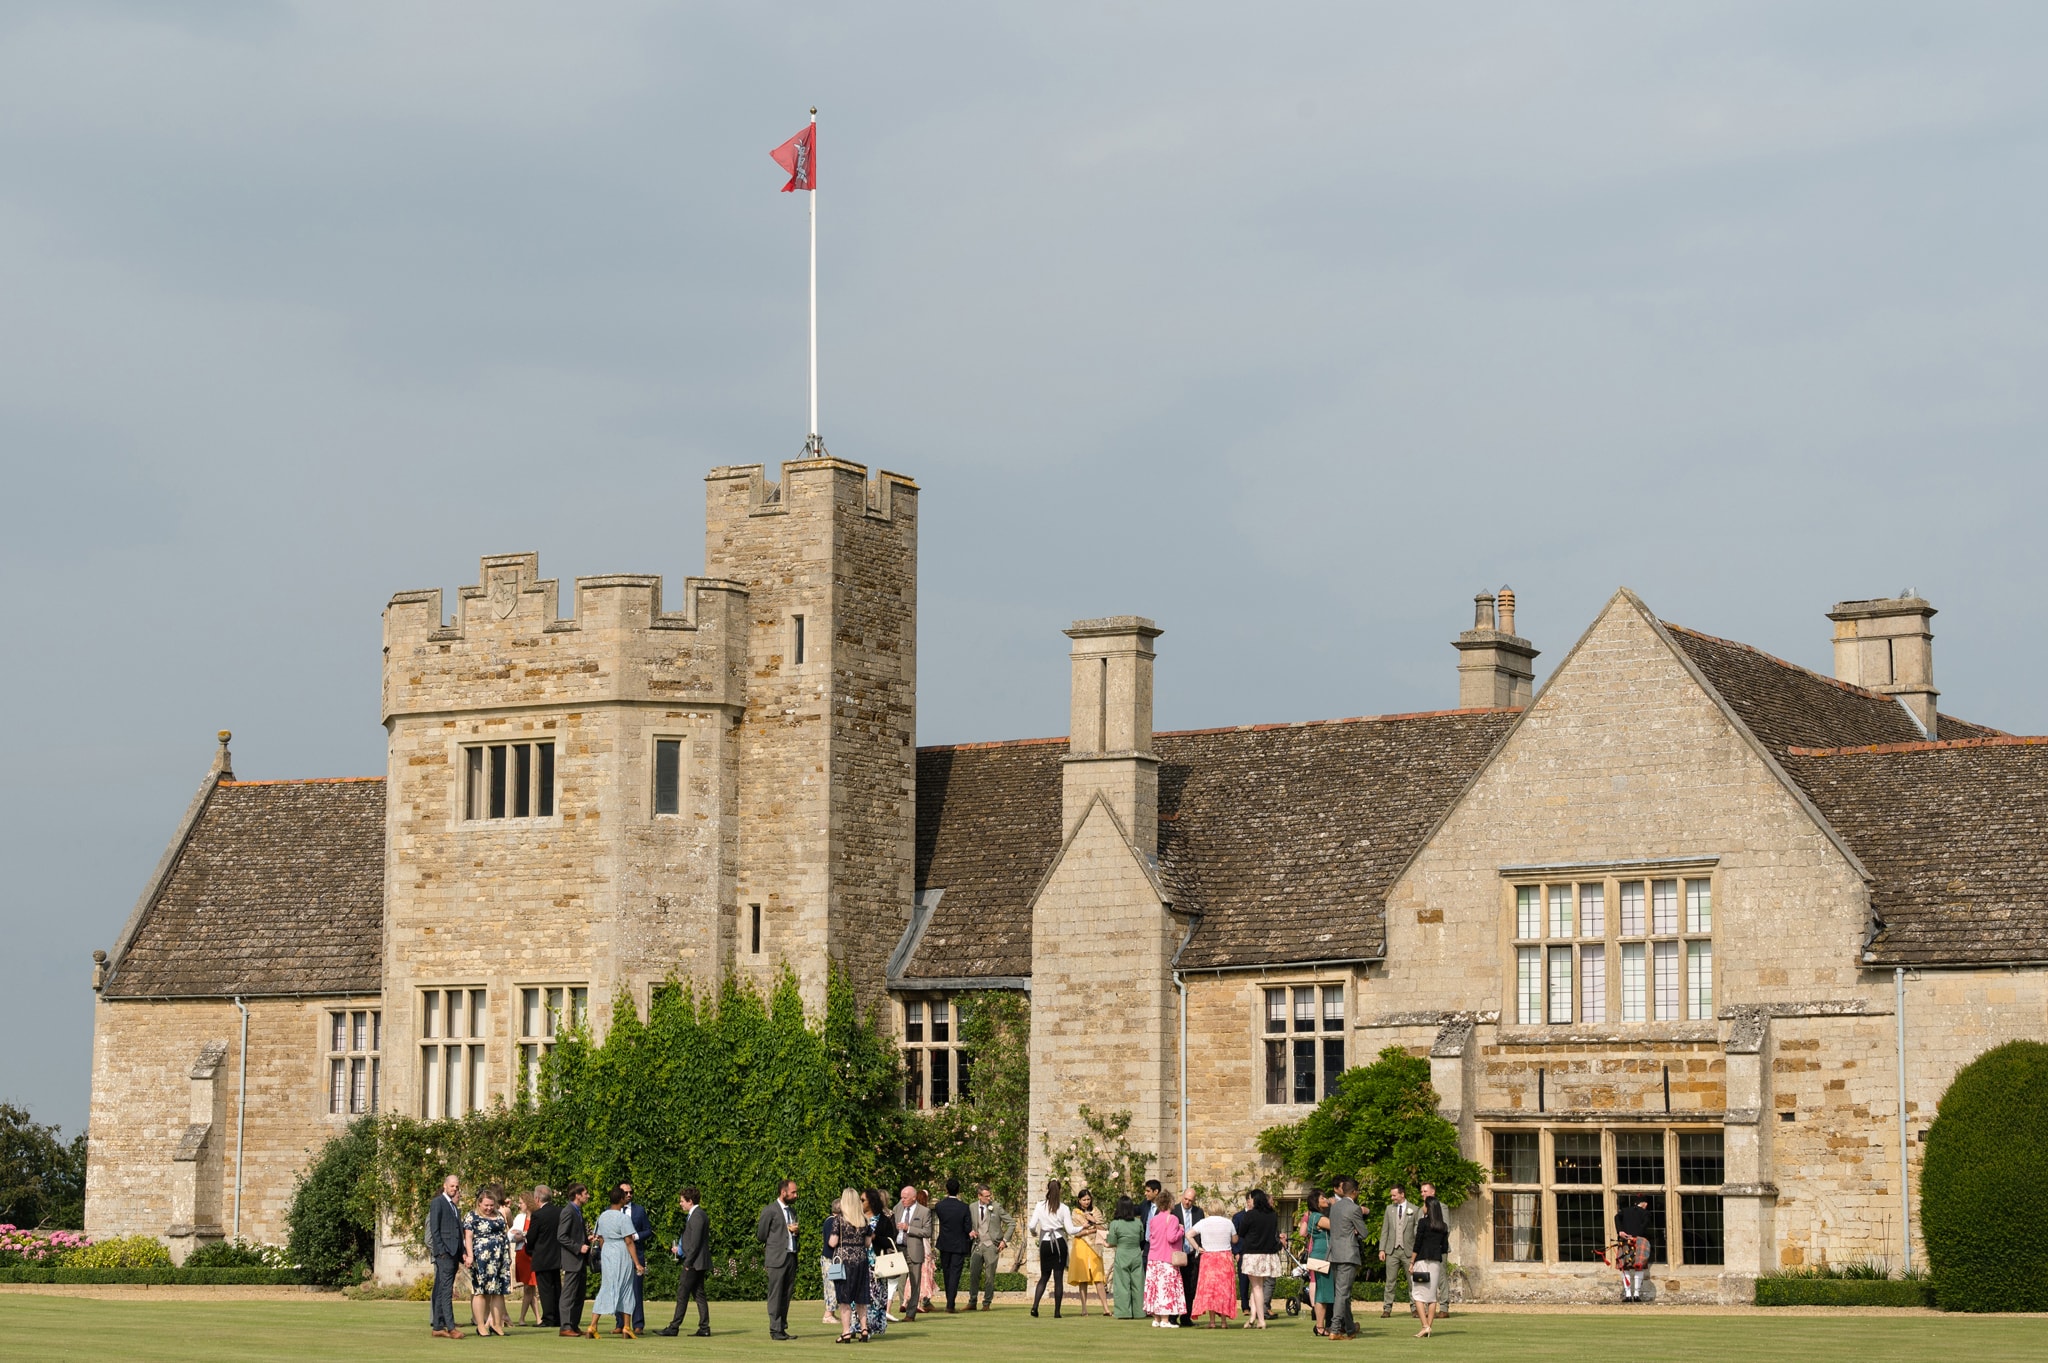 Wedding reception on the lawn in front of a castle